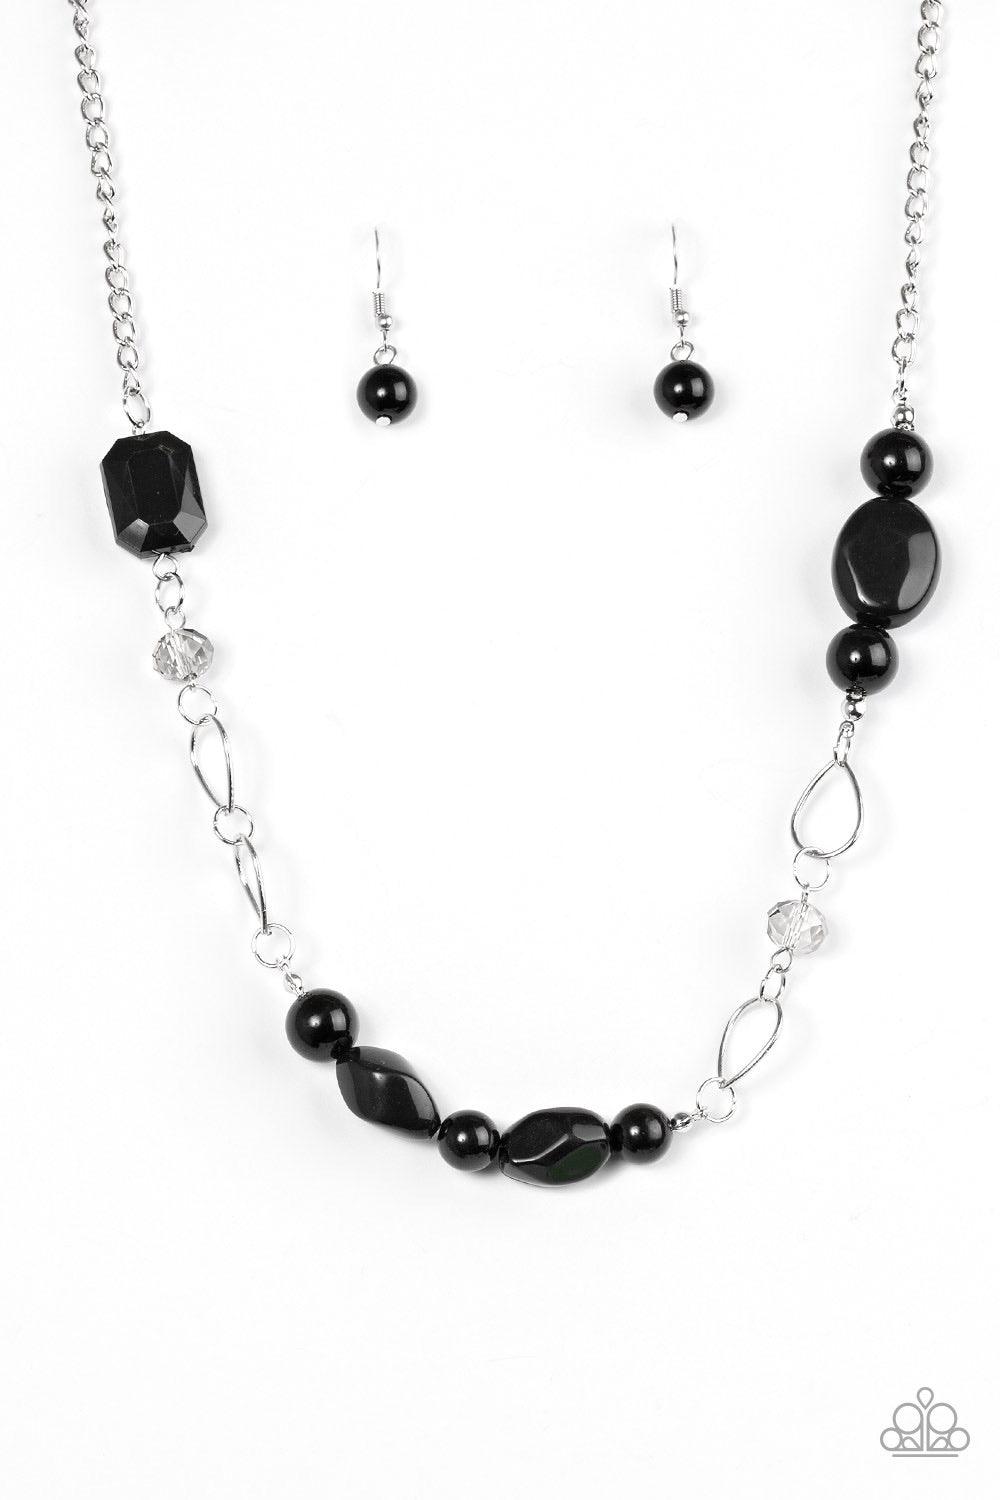 Paparazzi Accessories Bean Away - Black Featuring polished and glassy finishes, black beads trickle below the collar in a refined fashion. Faceted crystal-like beads and teardrop shaped frames are sprinkled between the colorful accents for a beaming finis